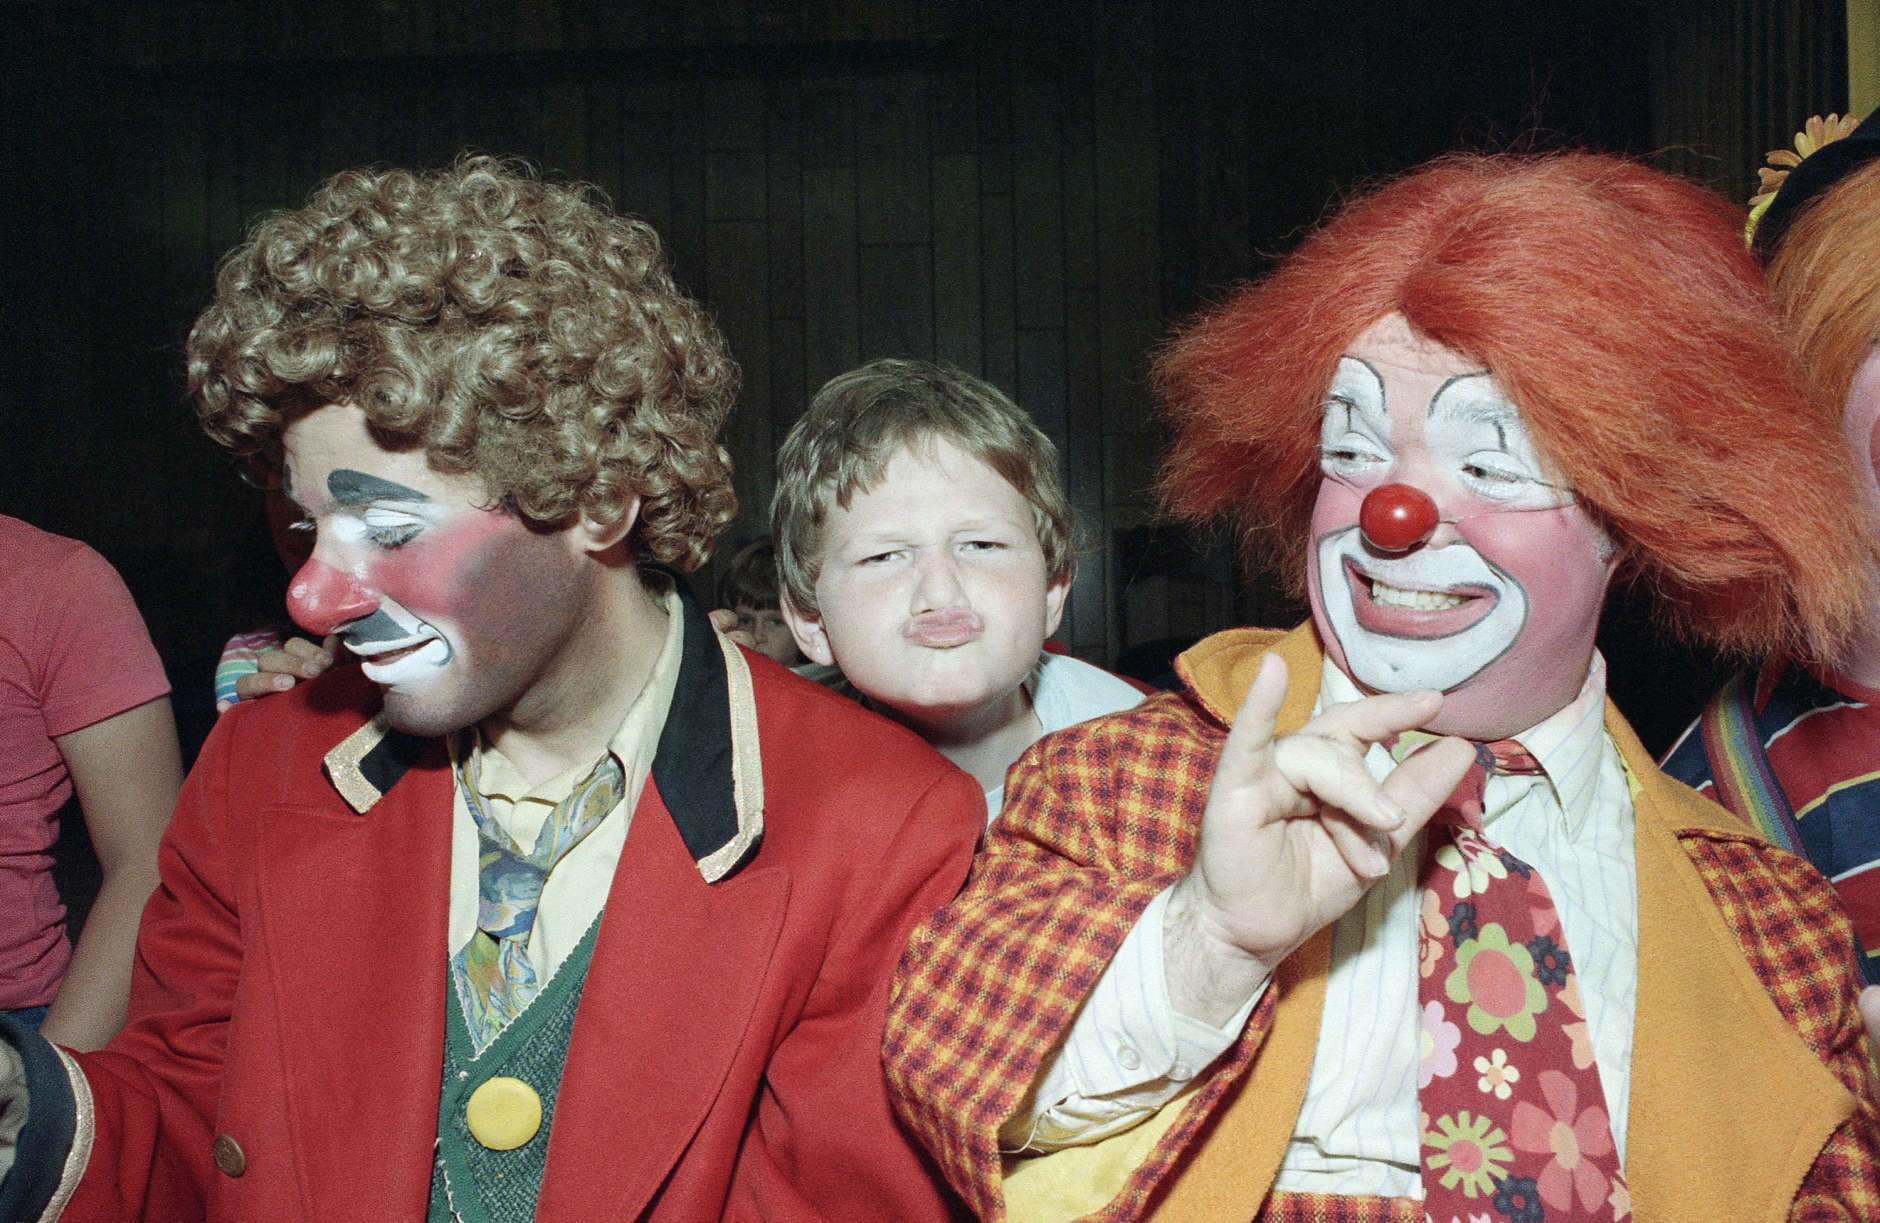 Kevin Thompson, celebrating his fourth year in Ringling Bros. Barnum and Bailey's famed Clown Alley, watches as 9-year-old Jonathon Young tries his hand at clowning during a visit by the circus troupe to Temple Beth Solomon of the Deaf in Arleta, California, Sept. 14, 1984. (AP Photo/Liu Heung Shing)